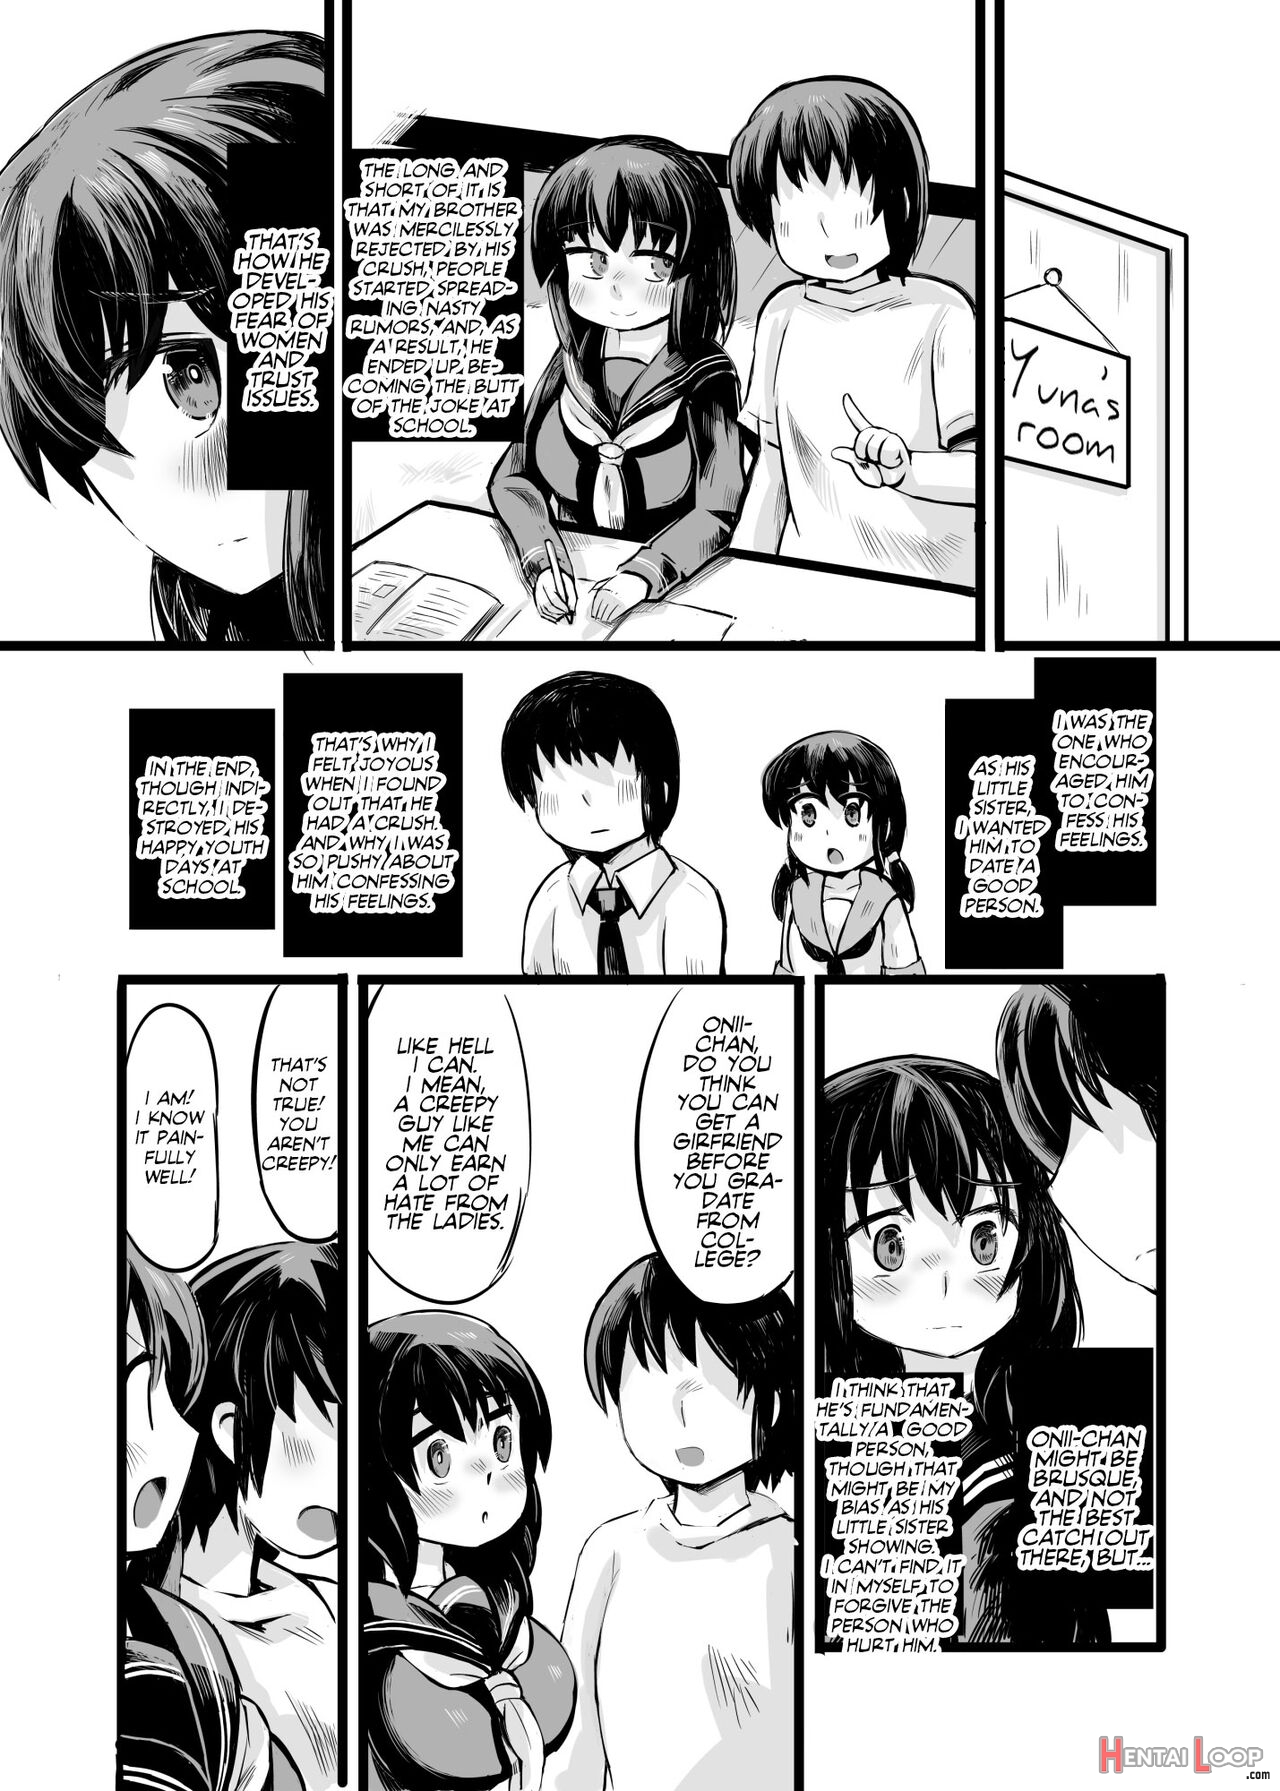 Fixing Onii-chan's Fear Of Women! page 5